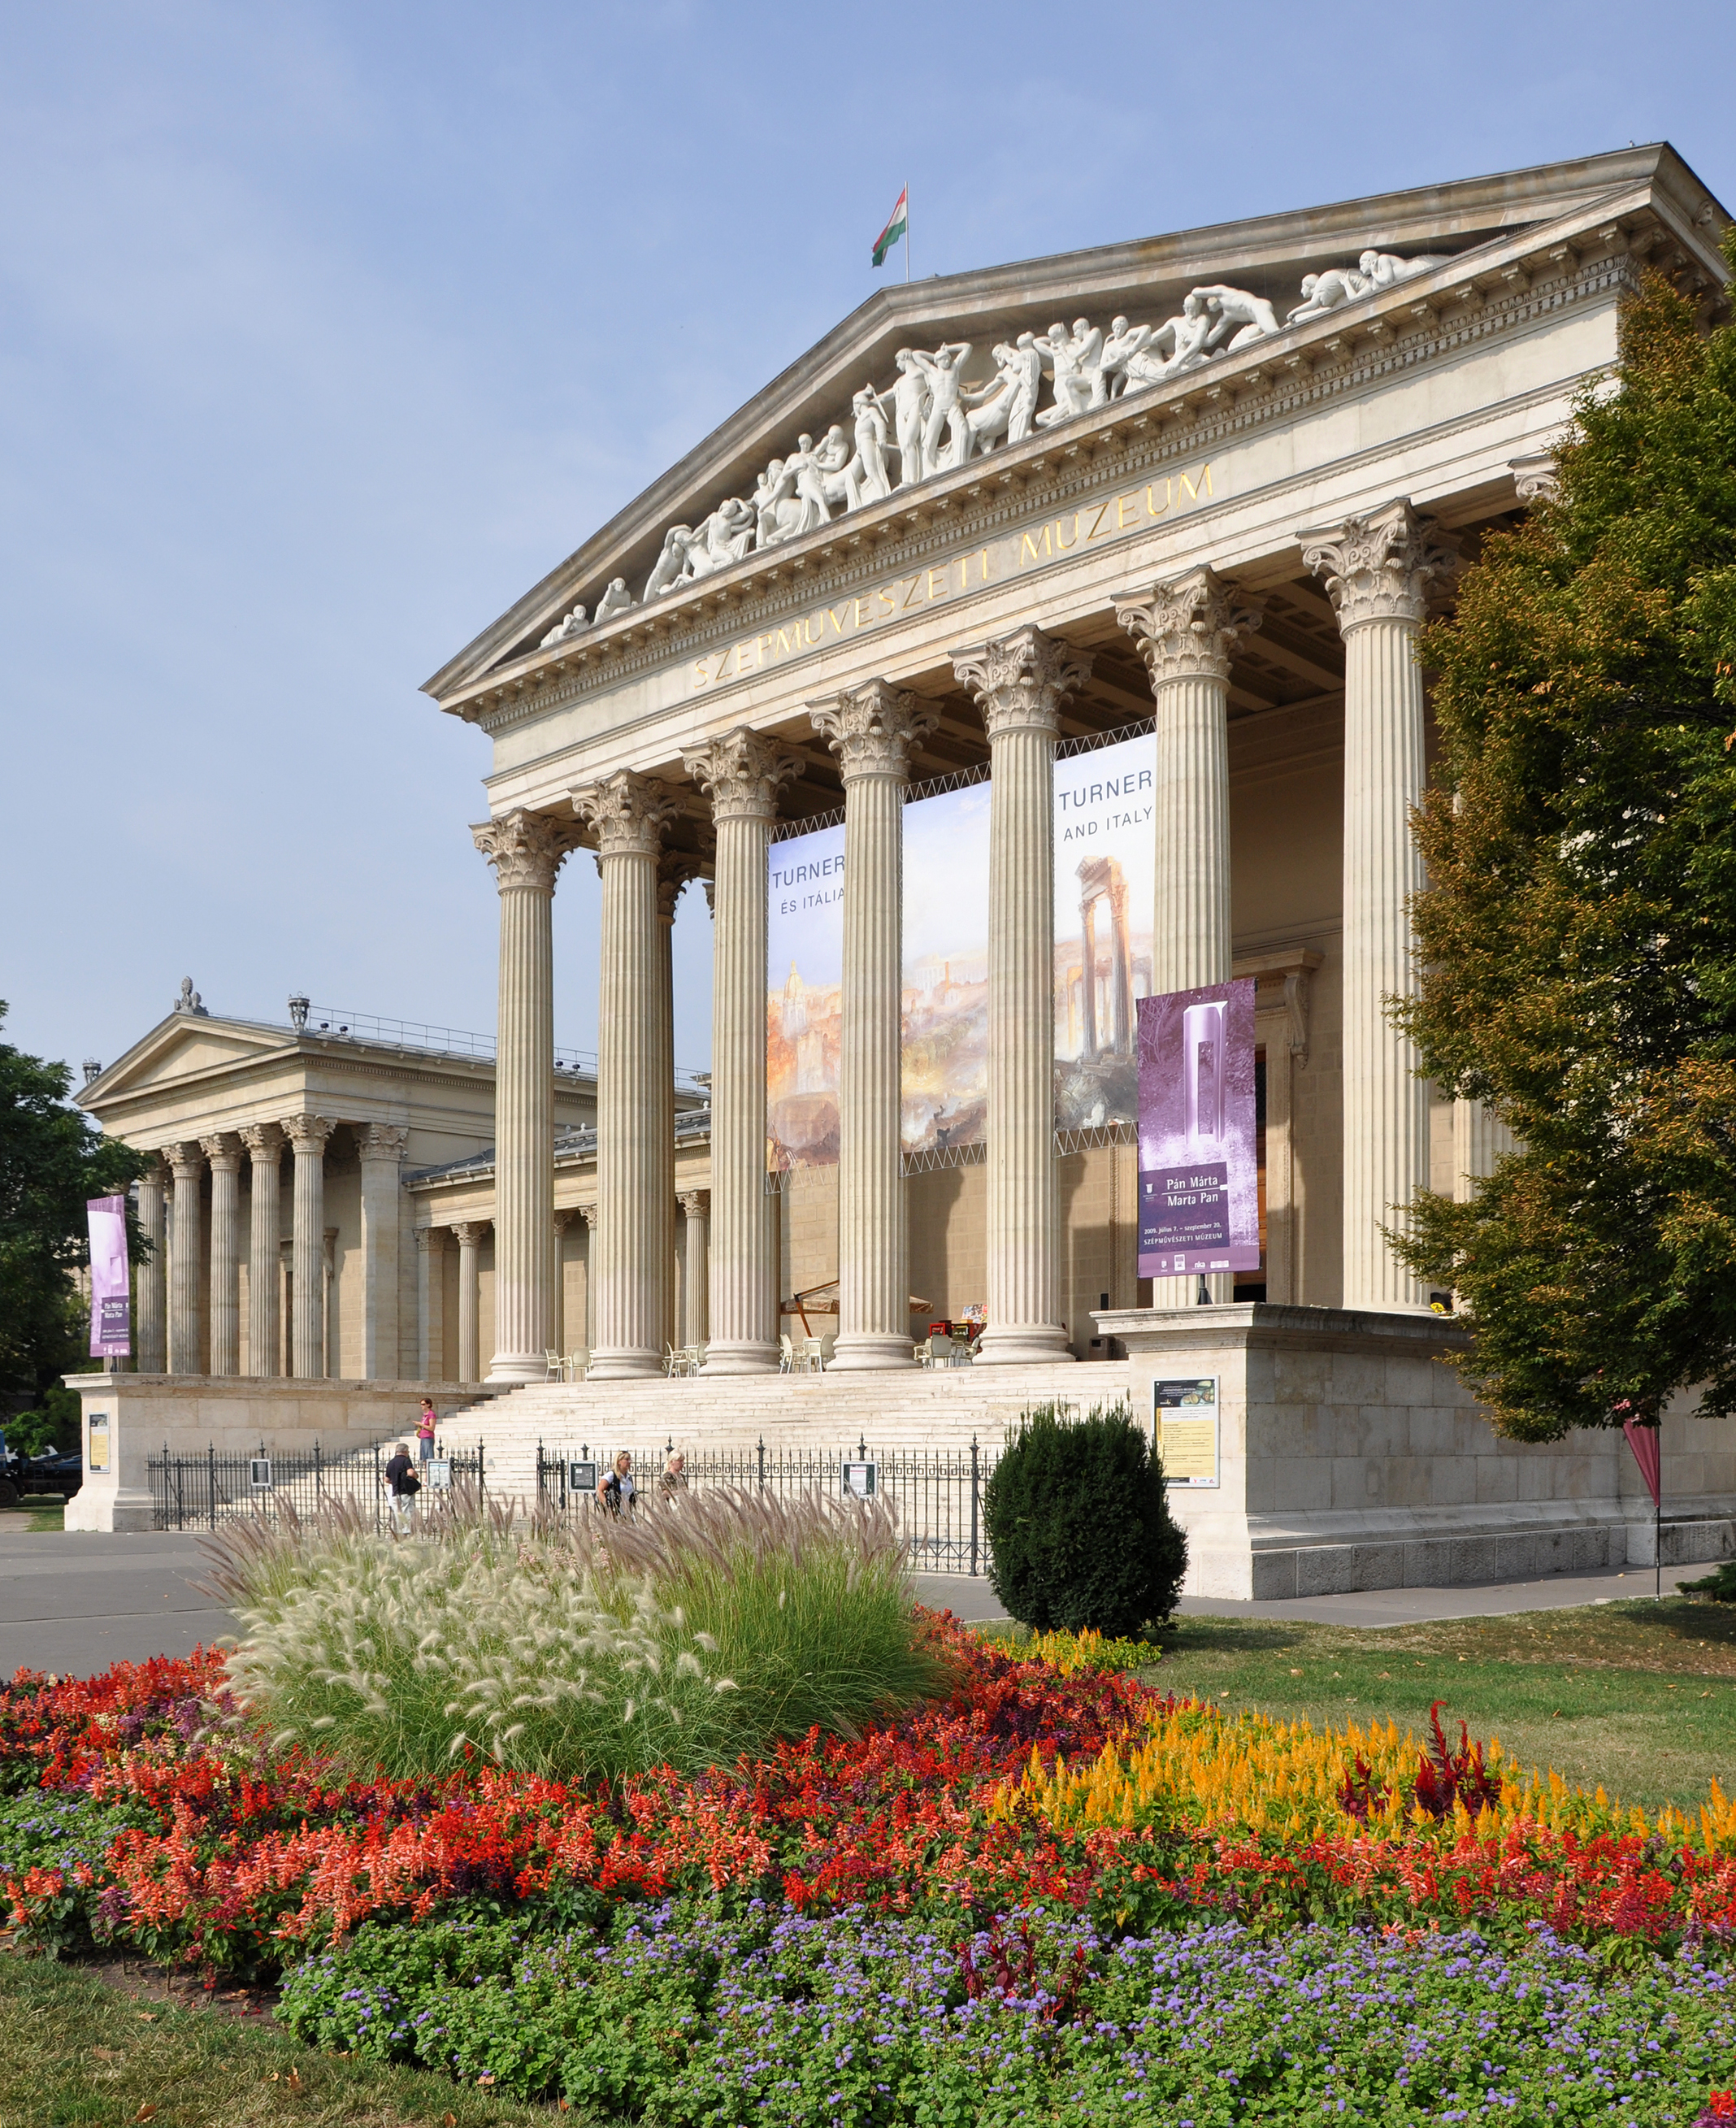 Discover Museums In Budapest For A Discount Price With MiniCards